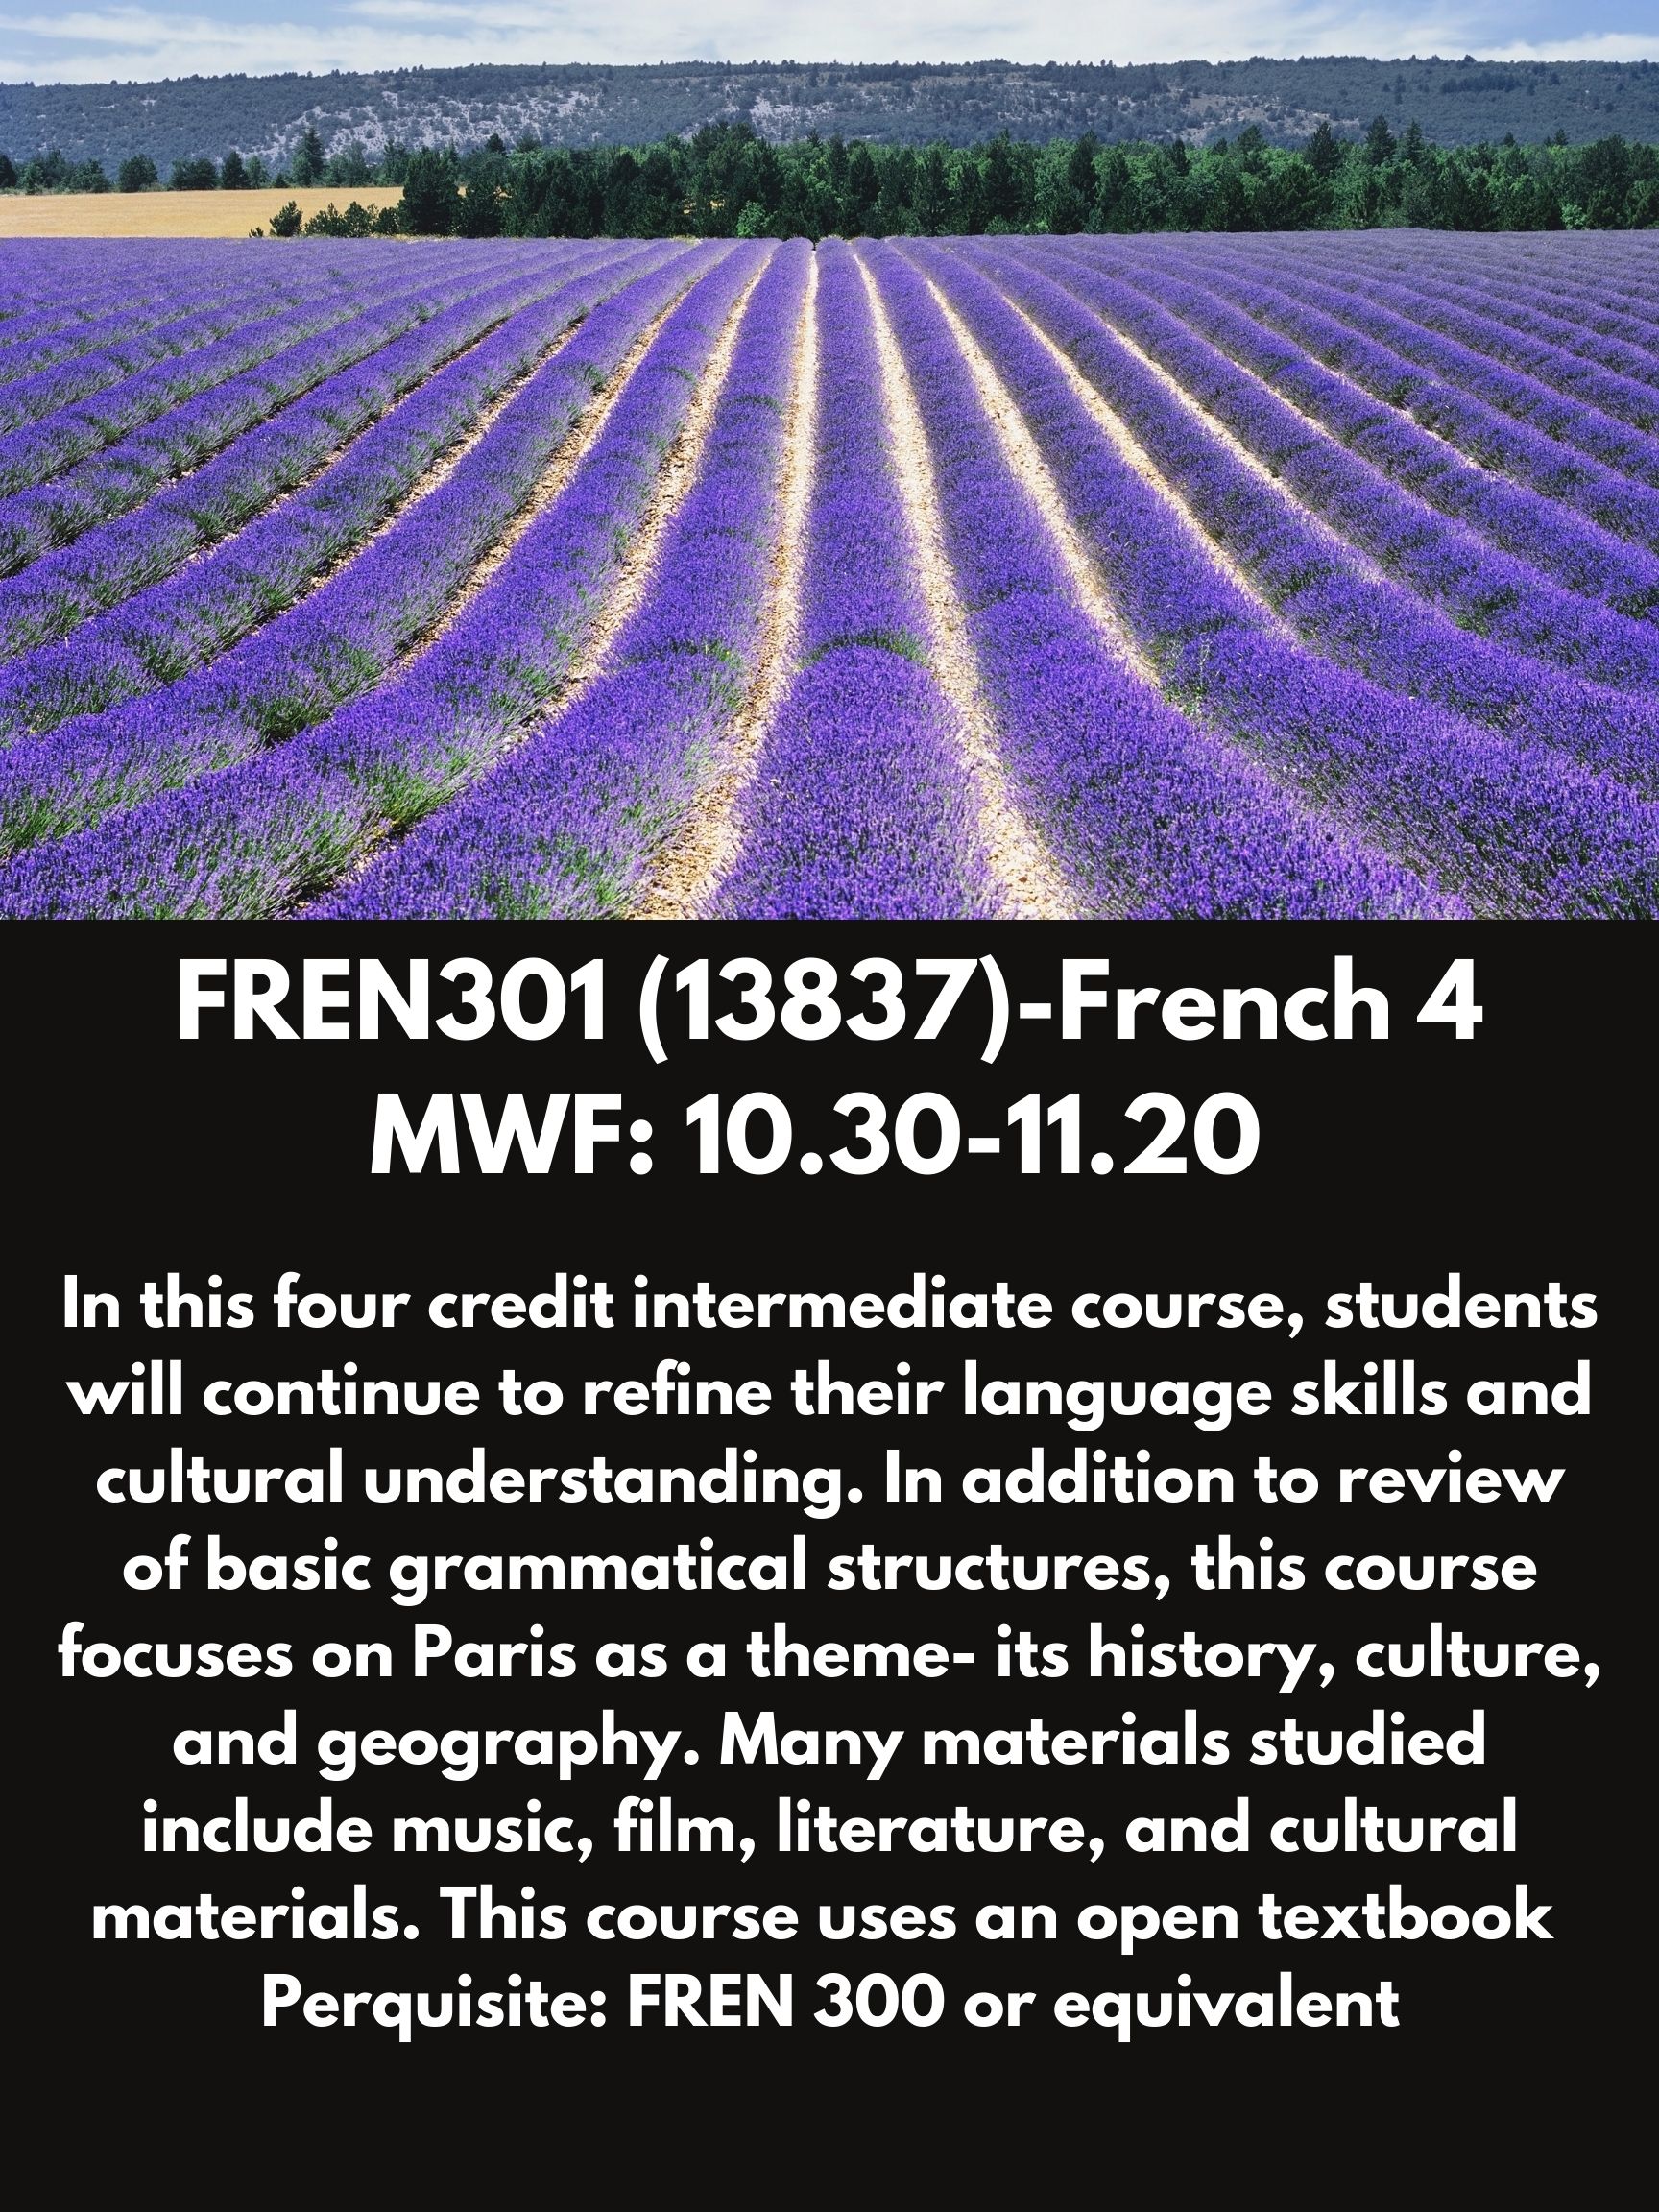 FREN301 (13837)-French 4 MWF: 10.30-11.20. In this four credit intermediate course, students will continue to refine their language skills and cultural understanding. In addition to review of basic grammatical structures, this course focuses on Paris as a theme- its history, culture, and geography. Many materials studied include music, film, literature, and cultural materials. This course uses an open textbook  Perquisite: FREN 300 or equivalent 